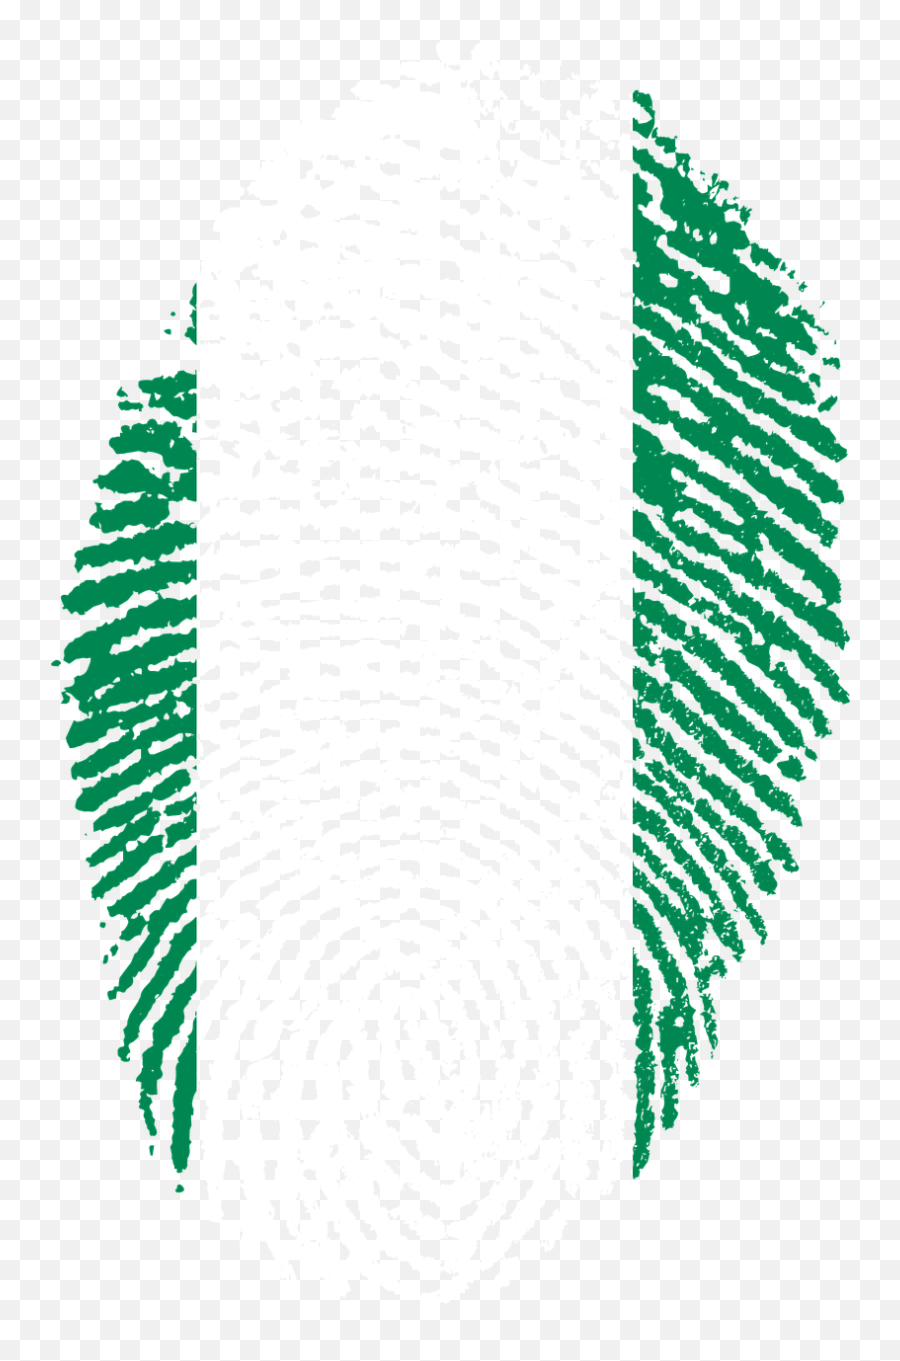 Puerto Rico Png Image With No - Nigeria Flag Finger Print,Nigerian Flag Png